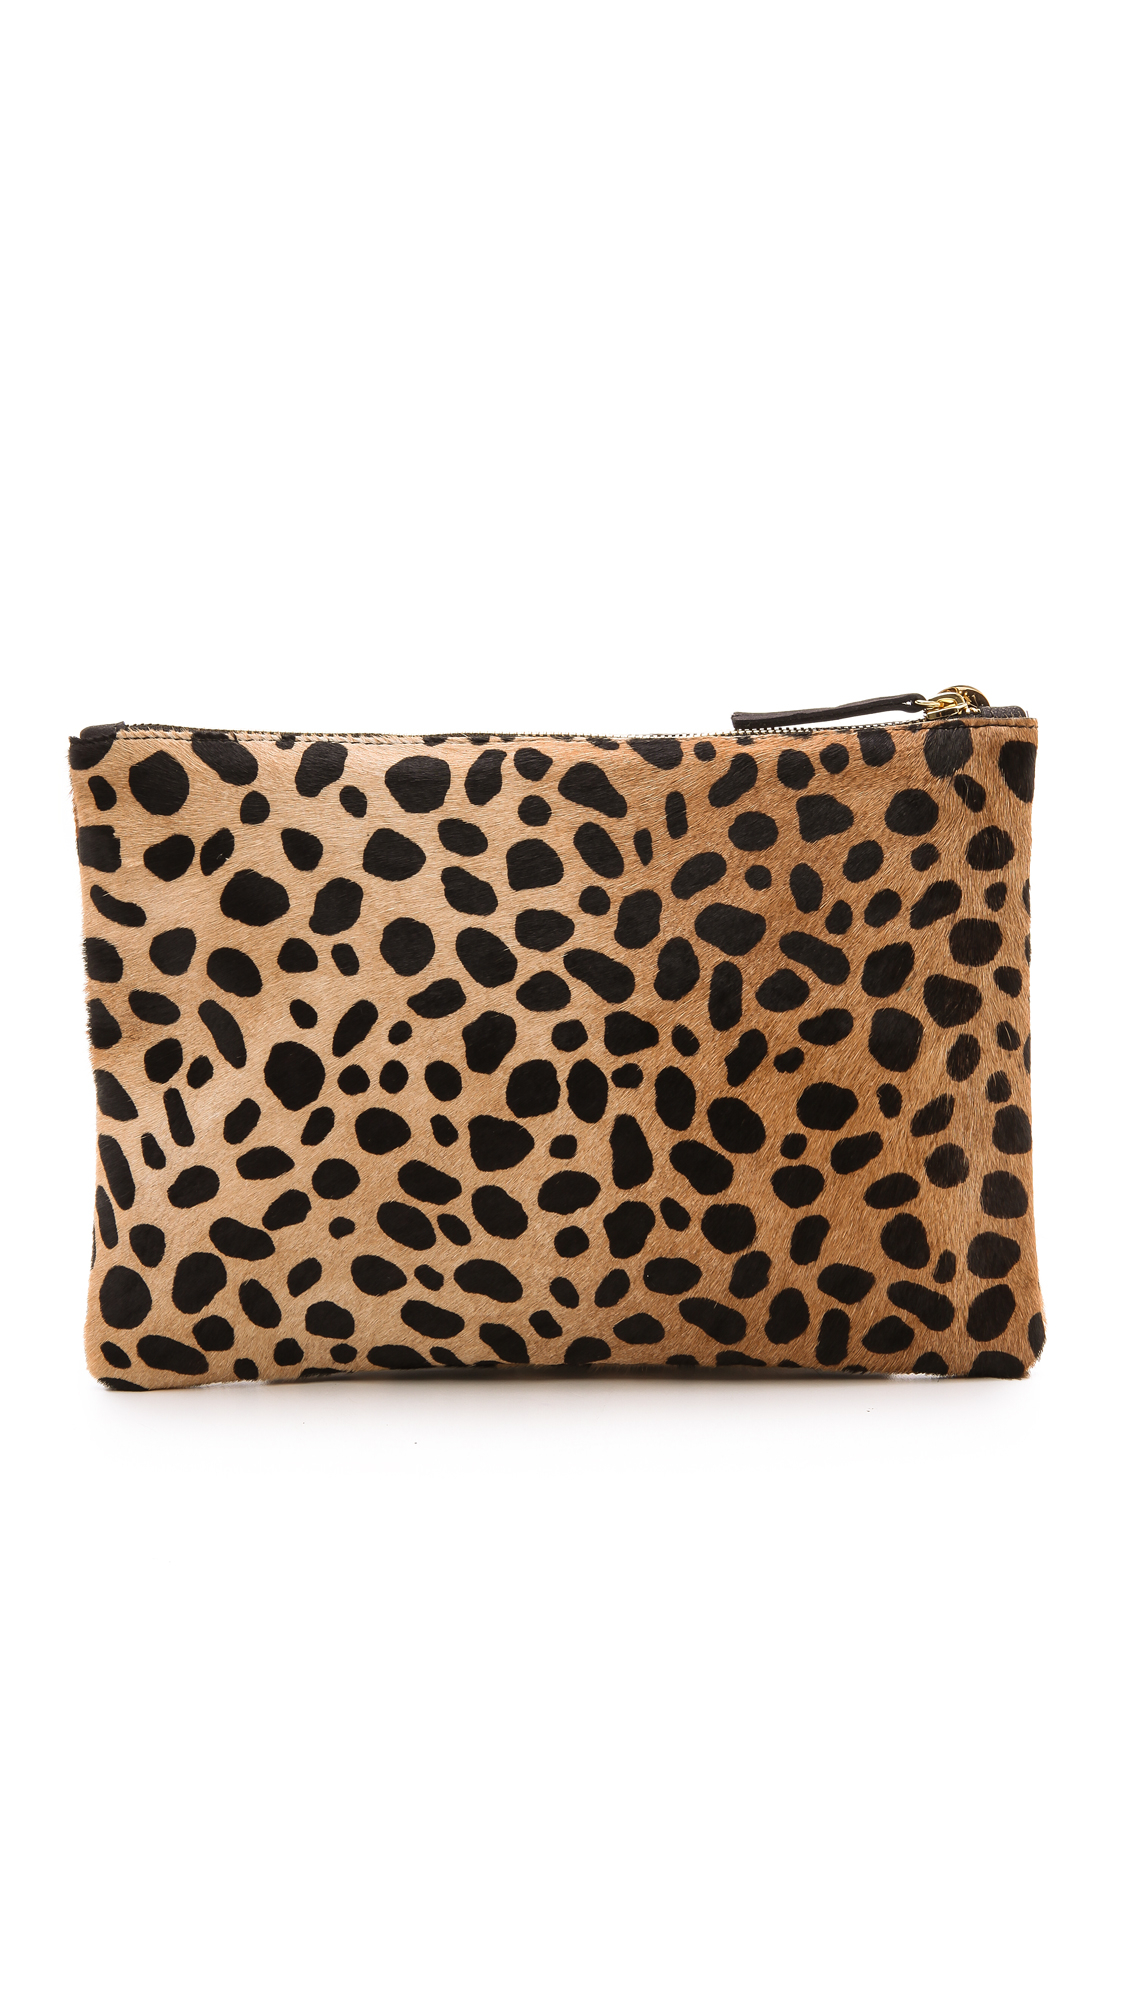 Clare v. Leopard Flat Haircalf Clutch in Animal (Leopard) | Lyst